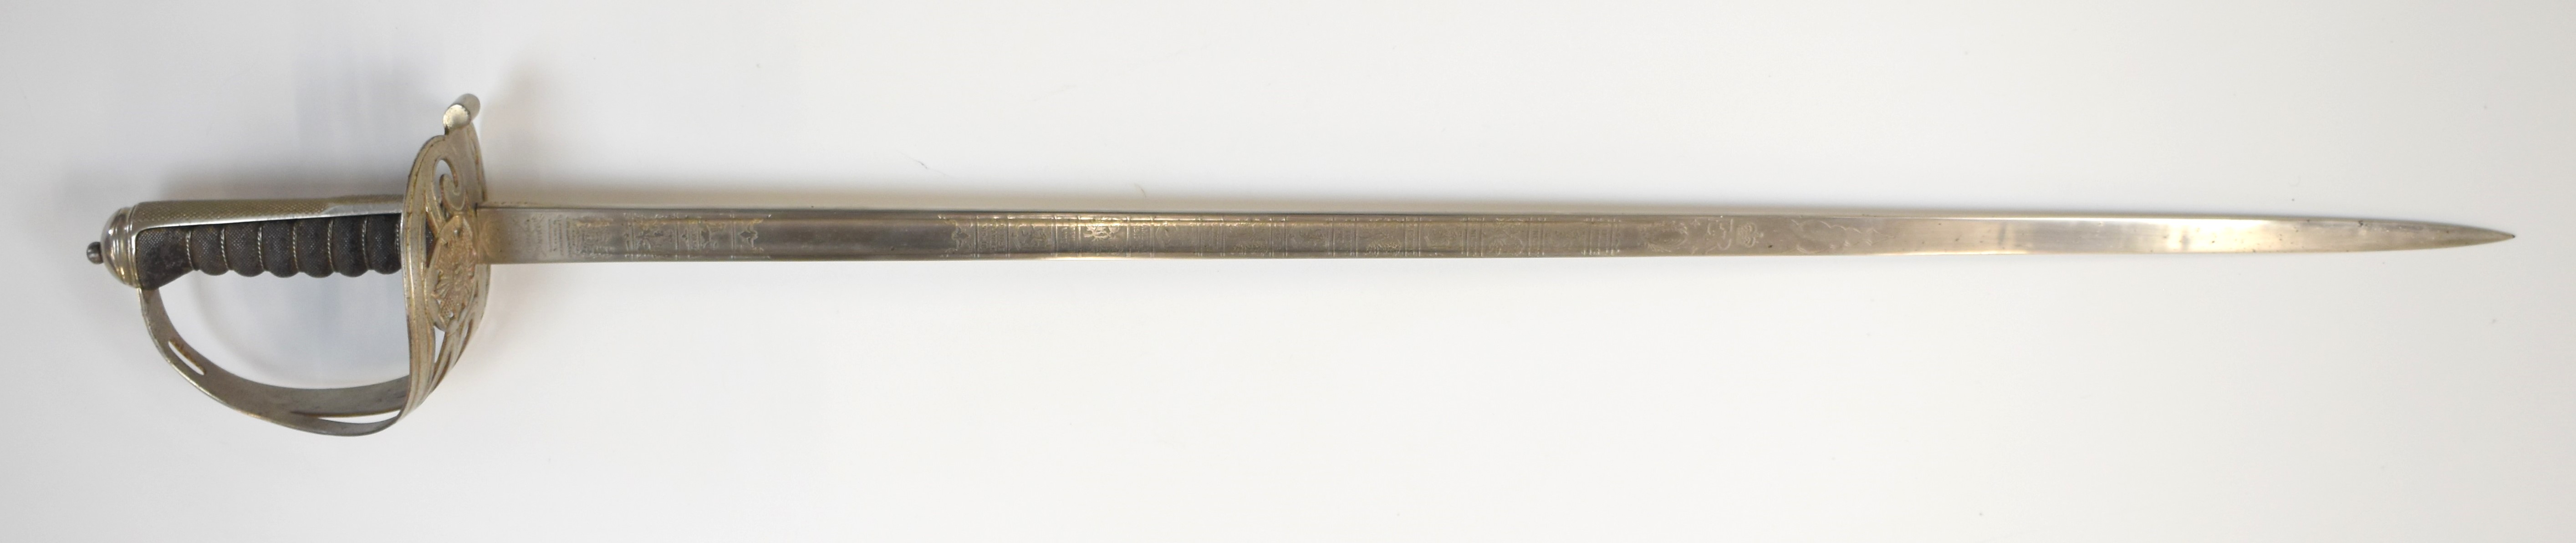 British Army 1854 pattern Scots Guard Foot Guards officer's sword by Wilkinson, number 72148, the - Image 8 of 16